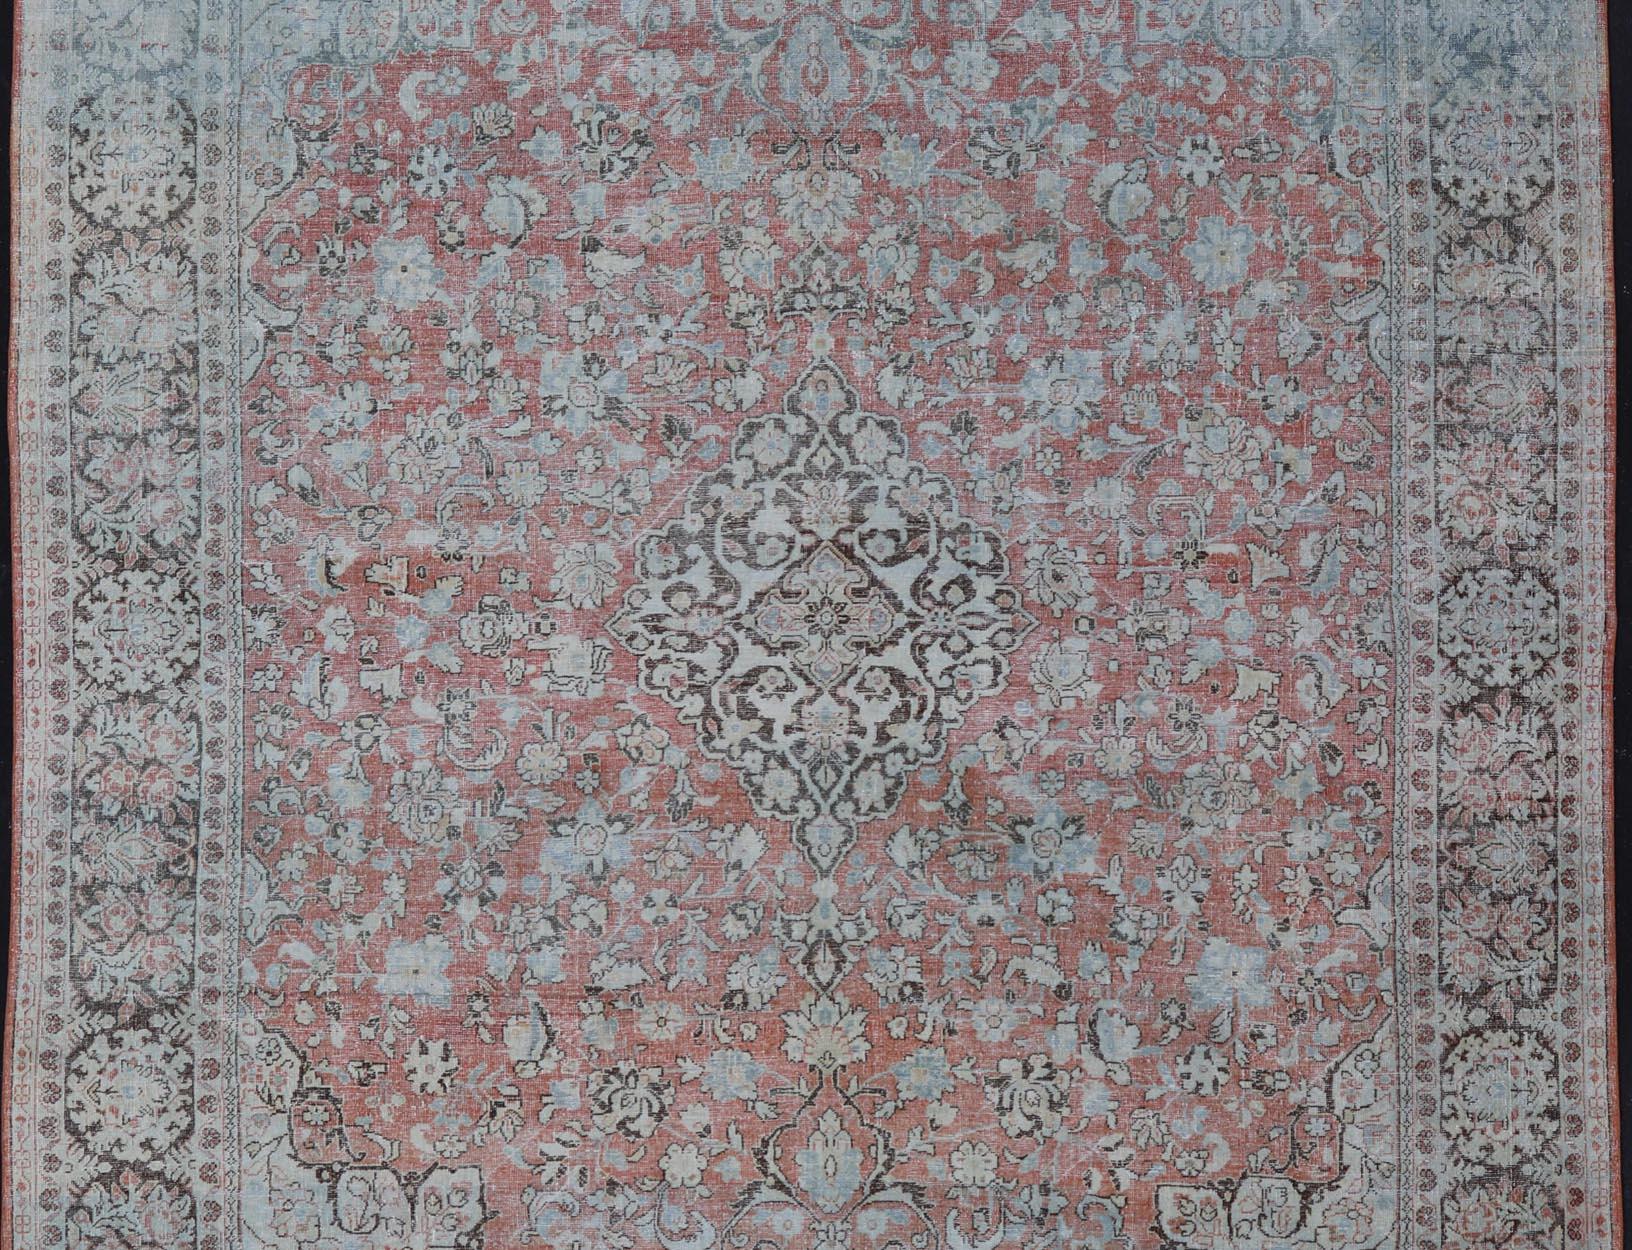 Hand-Knotted Distressed Antique Medallion Persian Mahal Rug in Faded Orange, Cream and Brown For Sale